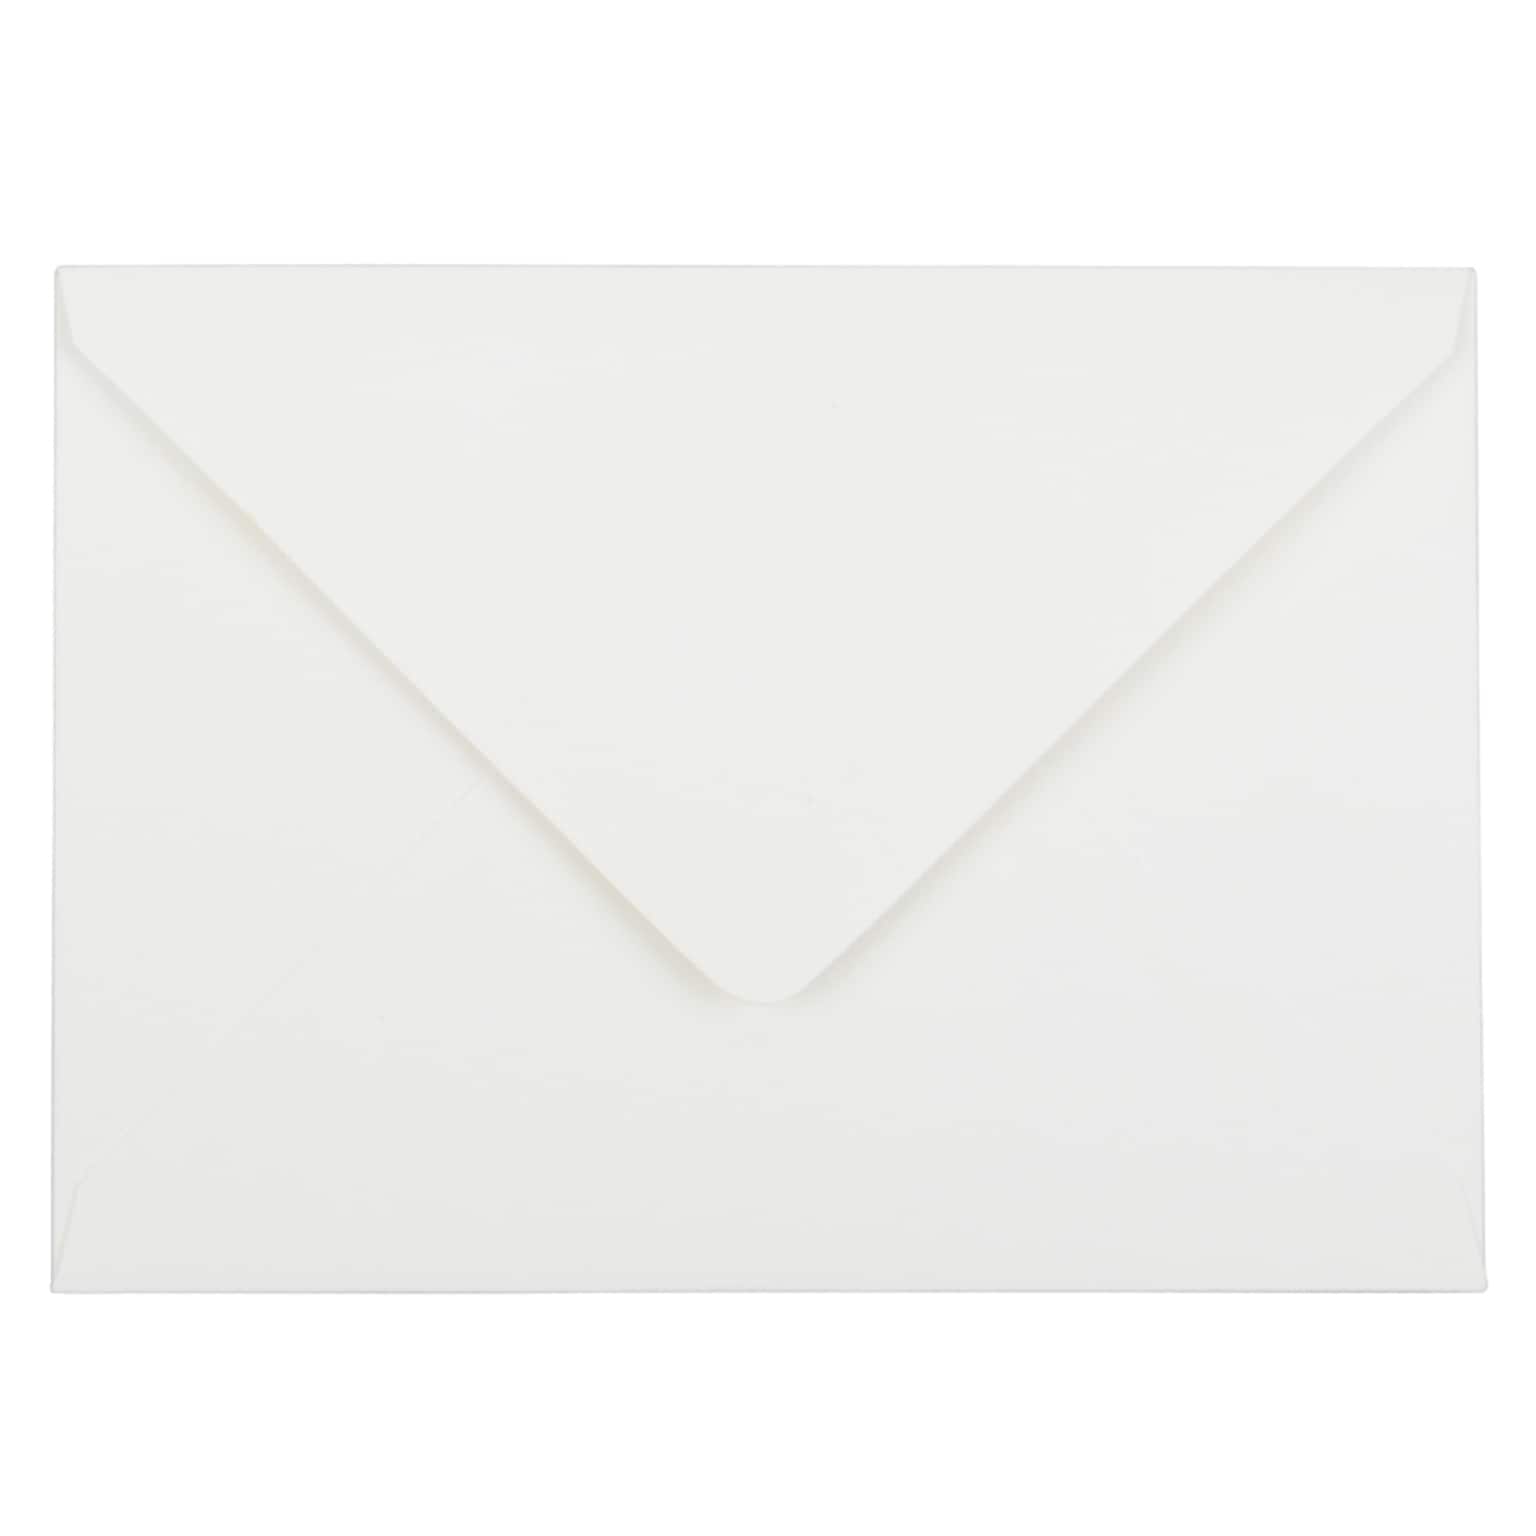 JAM Paper A7 Strathmore Invitation Envelopes with Euro Flap, 5.25 x 7.25, Bright White Wove, 25/Pack (1921392)